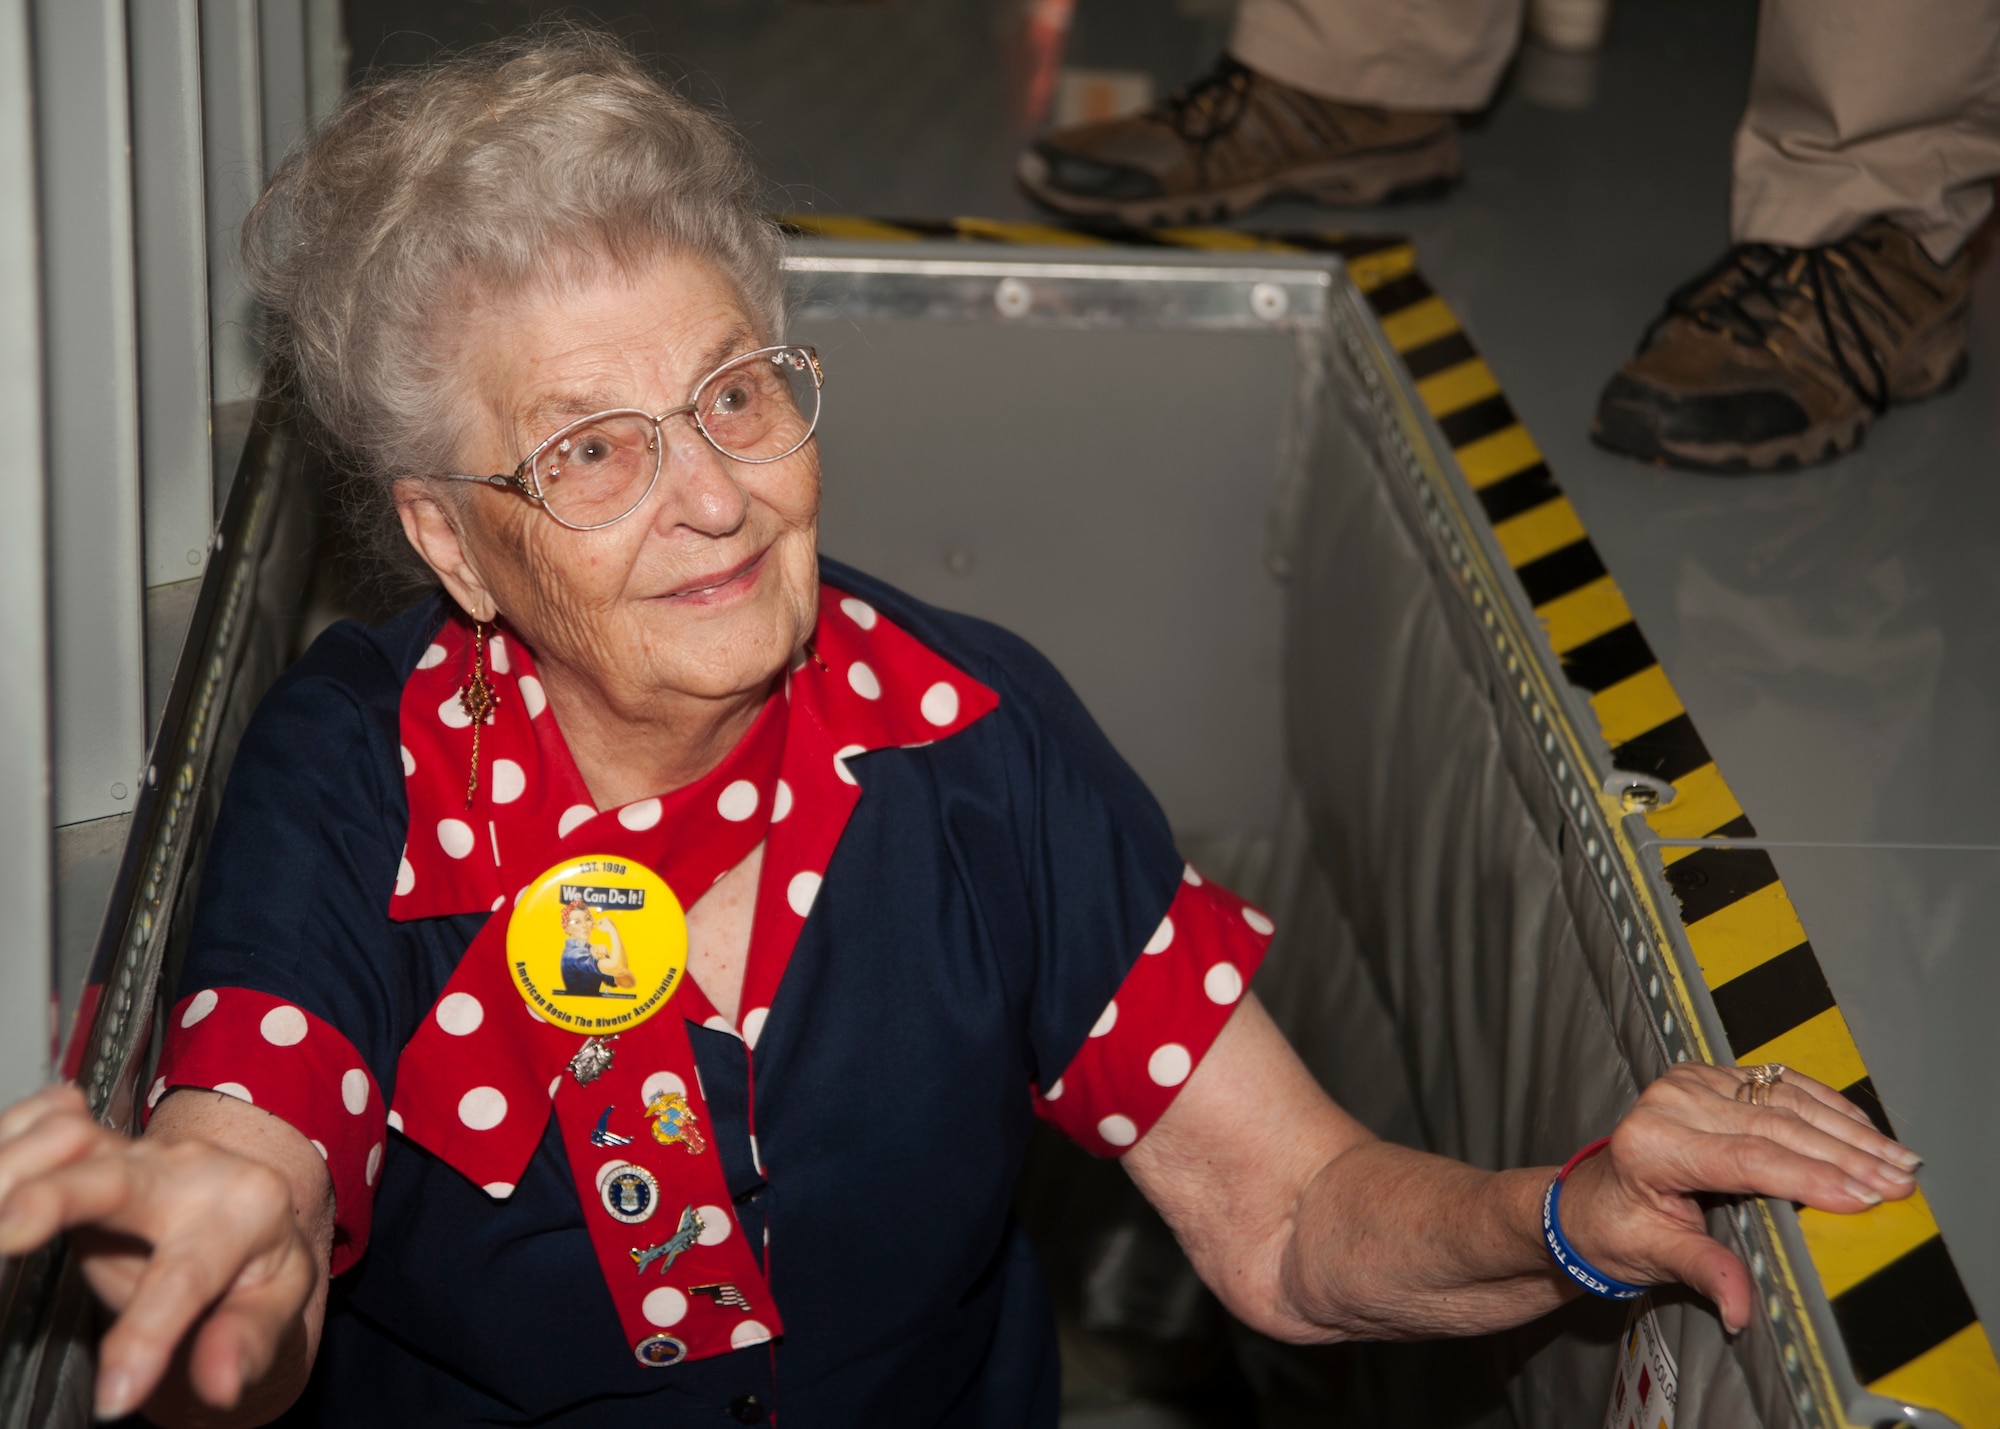 Mae Krier, an original “Rosie the Riveter” who helped build B-17s and B-29s during WWII, comes up from the boom pod in a KC-135 Stratotanker while on a tour at the 459th Air Refueling Wing at Joint Base Andrews, Md., April 30, 2019. Krier led a successful campaign for National Rosie the Riveter Day which led to a unanimous Congressional approval in 2017. It is now observed during Women’s History Month on March 21. (U.S. Air Force photo by Staff Sgt. Cierra Presentado)